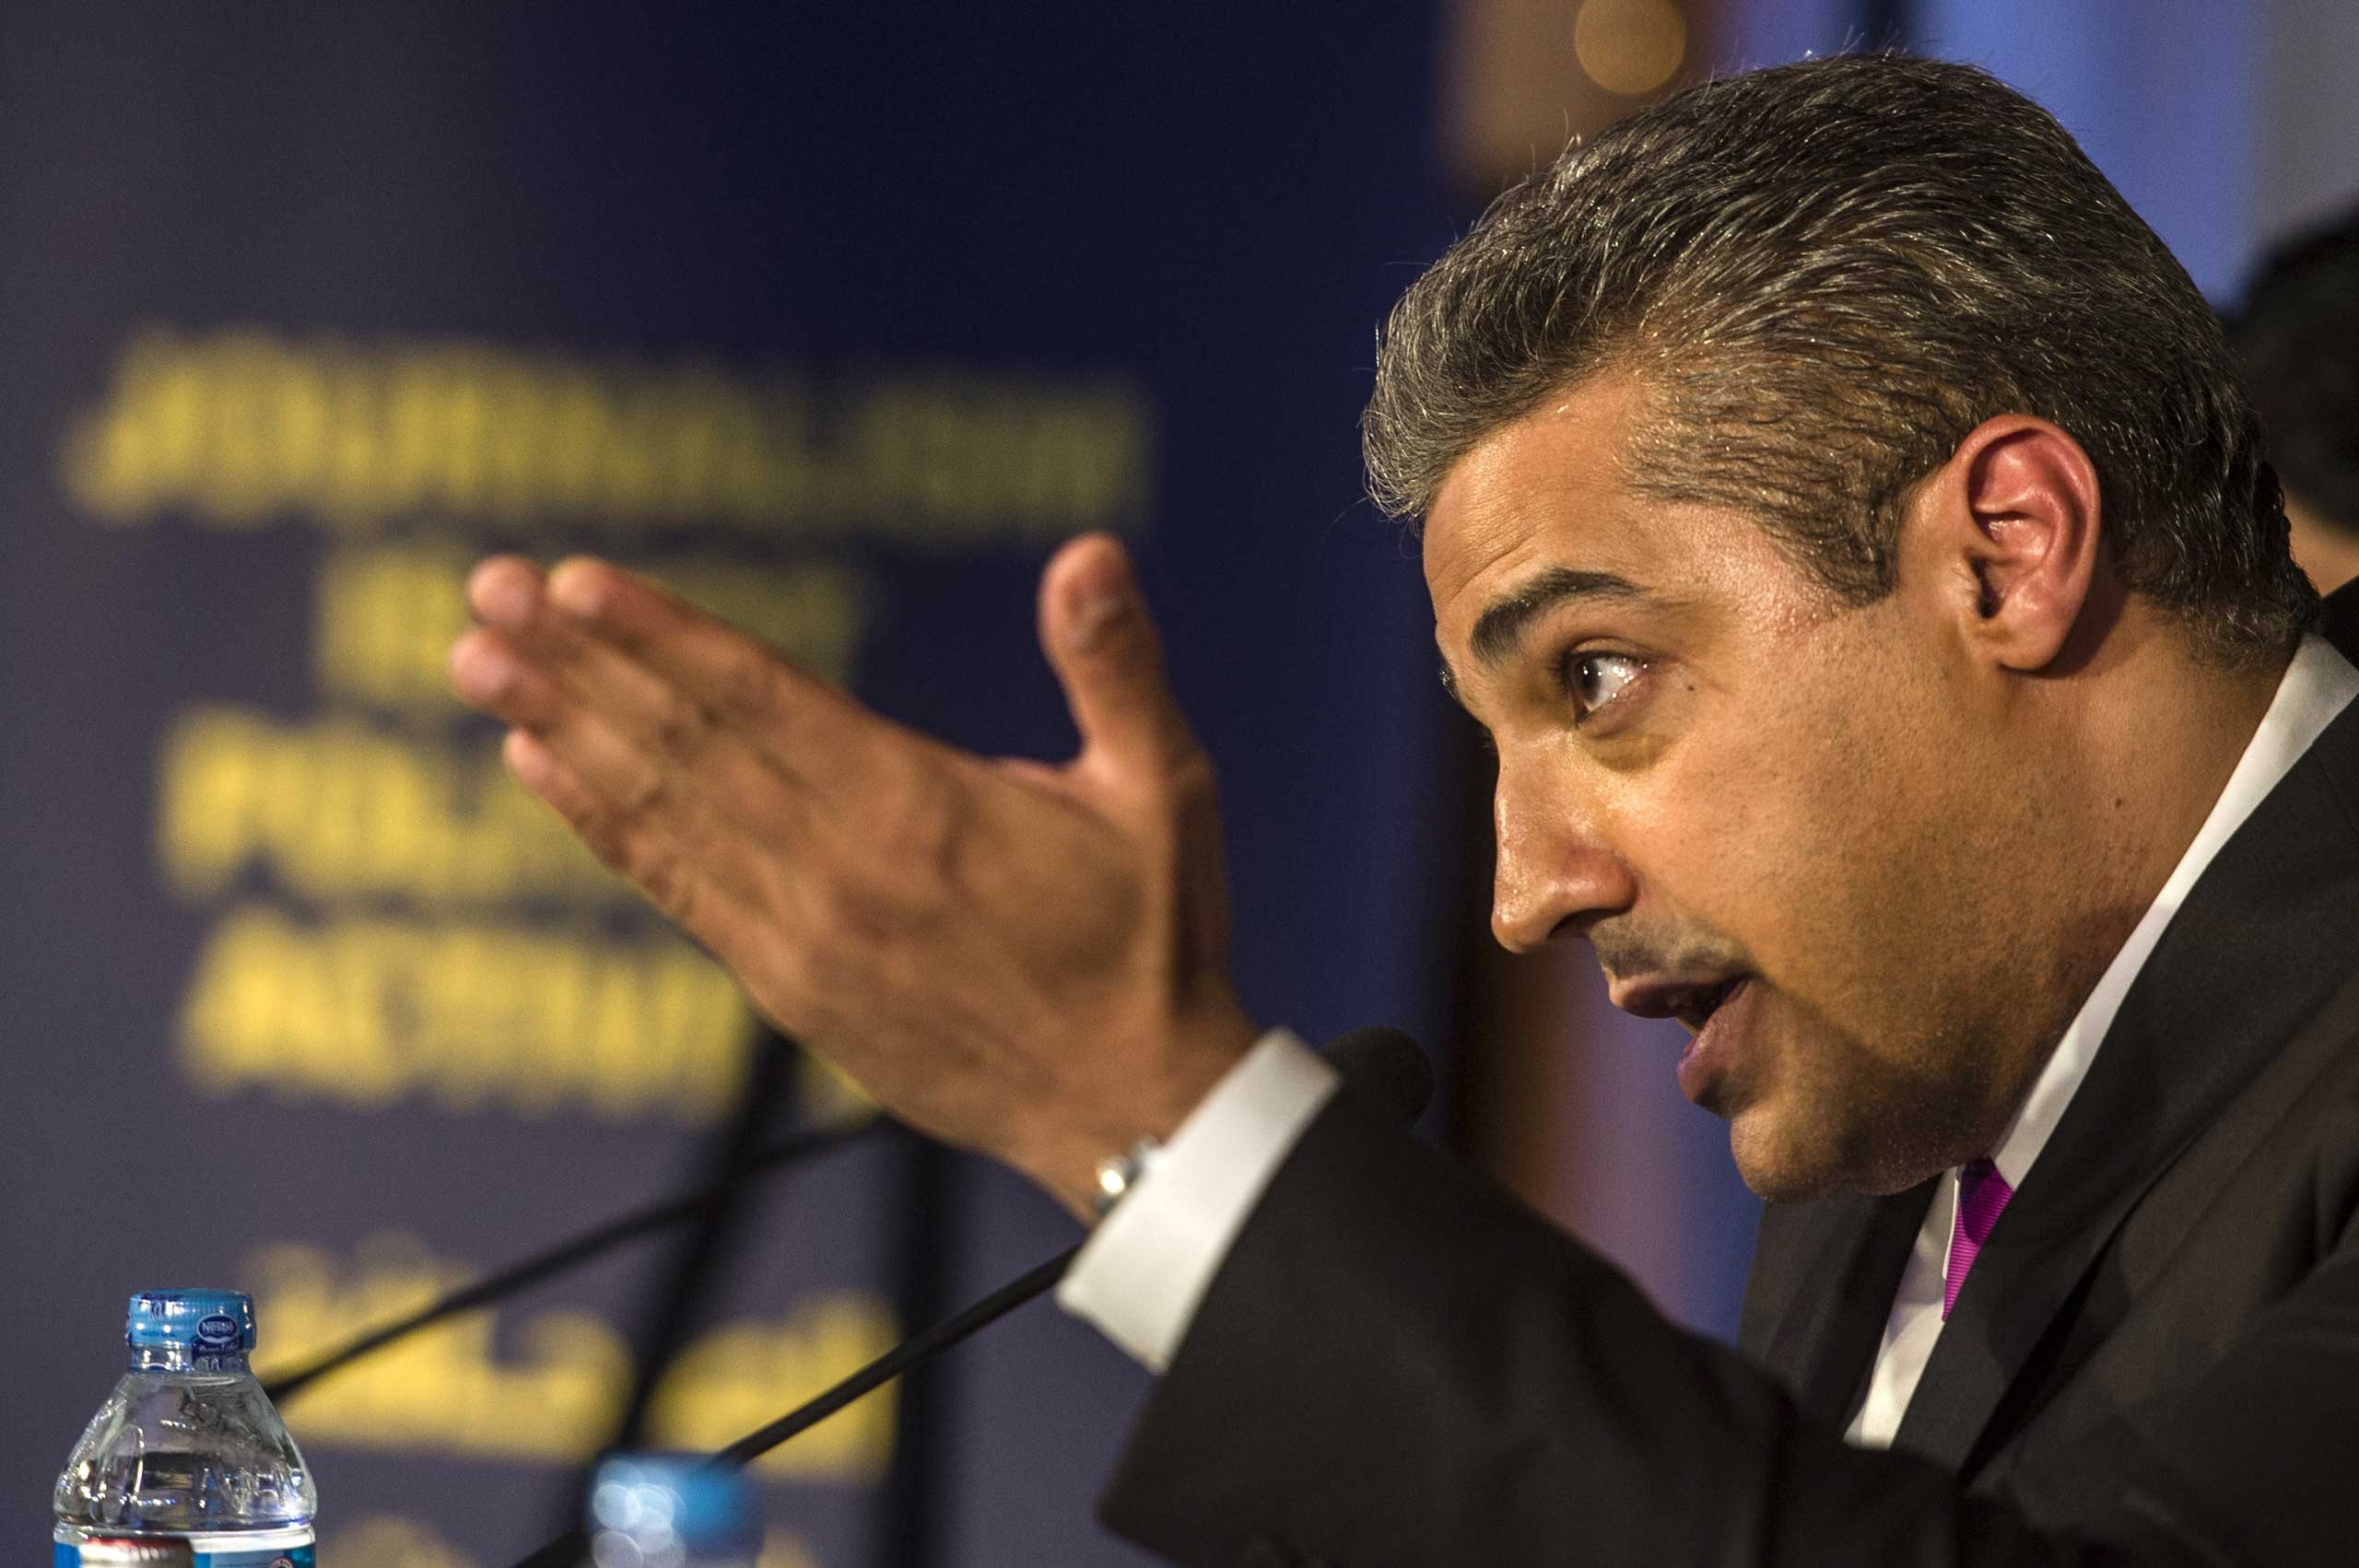 Egyptian-Canadian journalist Mohamed Fahmy, formerly with Al-Jazeera, attends a press conference in Cairo on May 11, 2015.